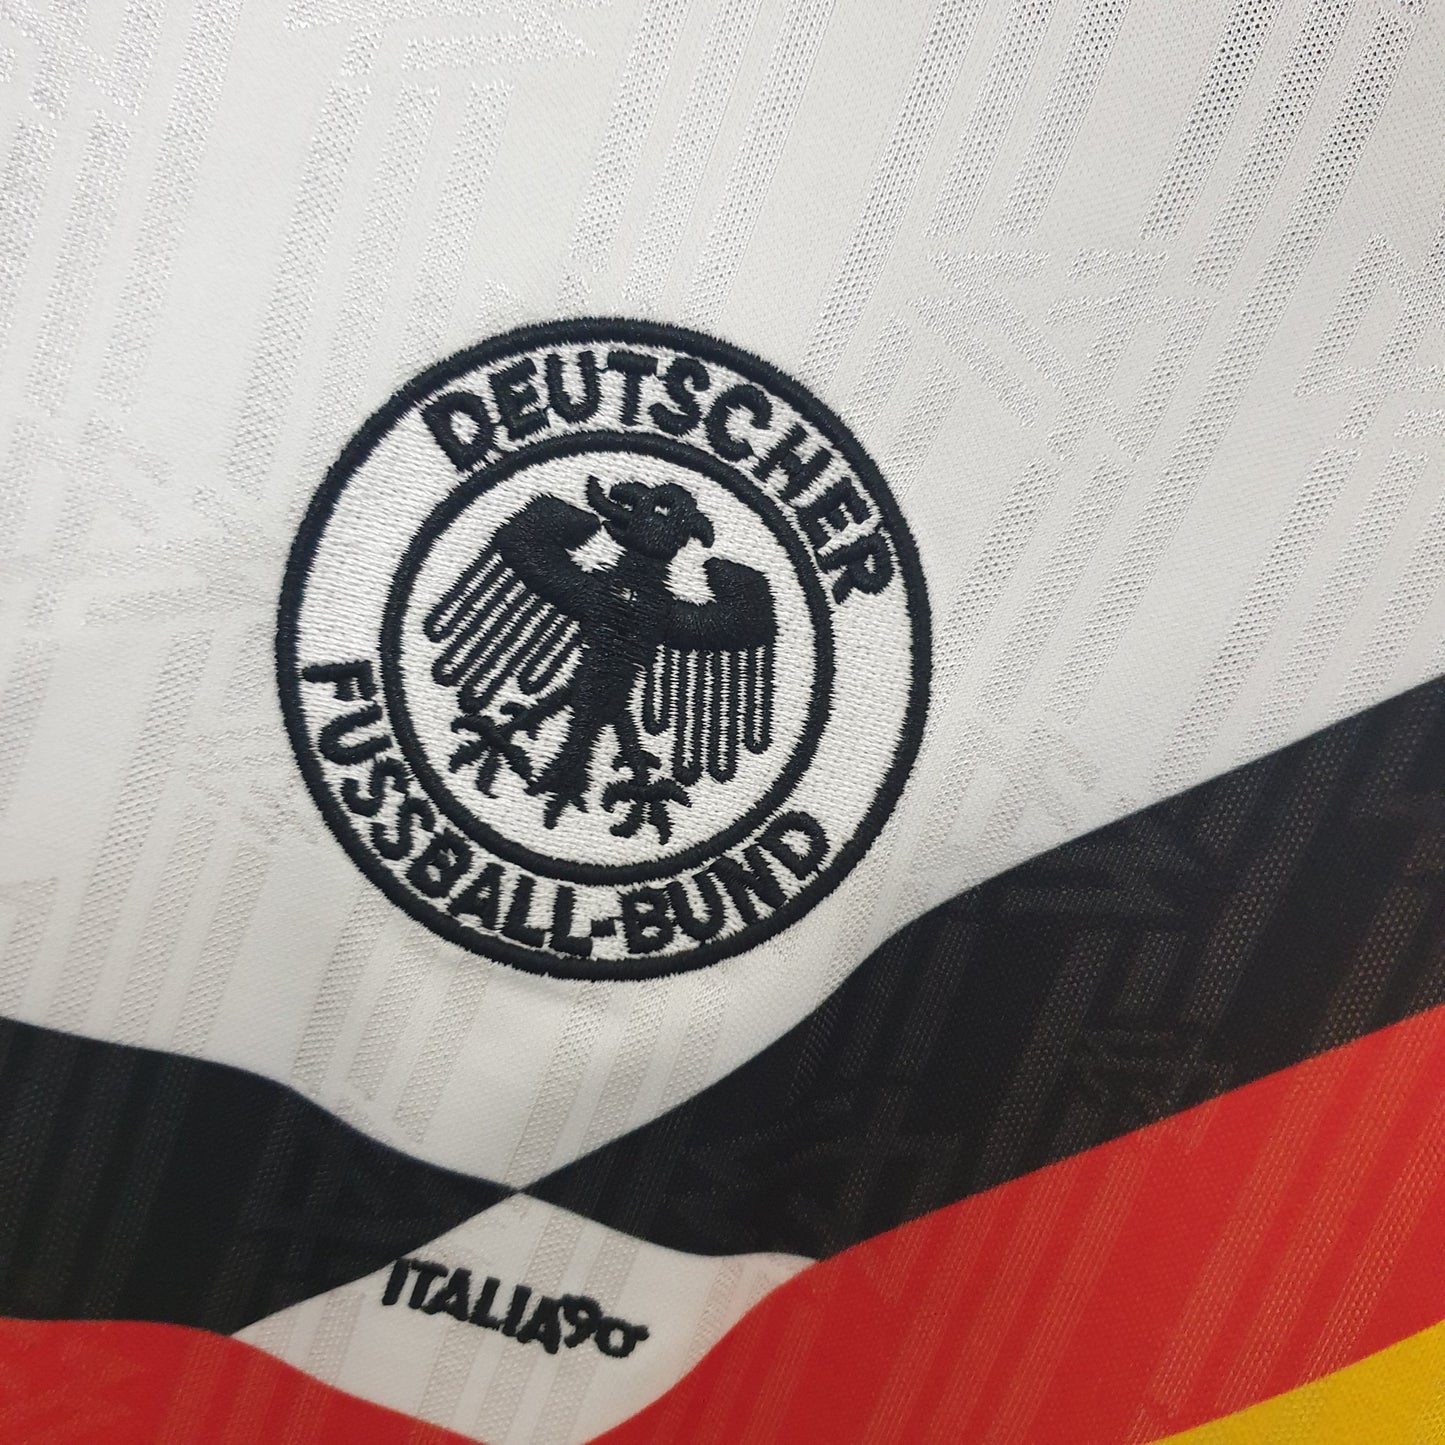 GERMANY 1990 HOME JERSEY